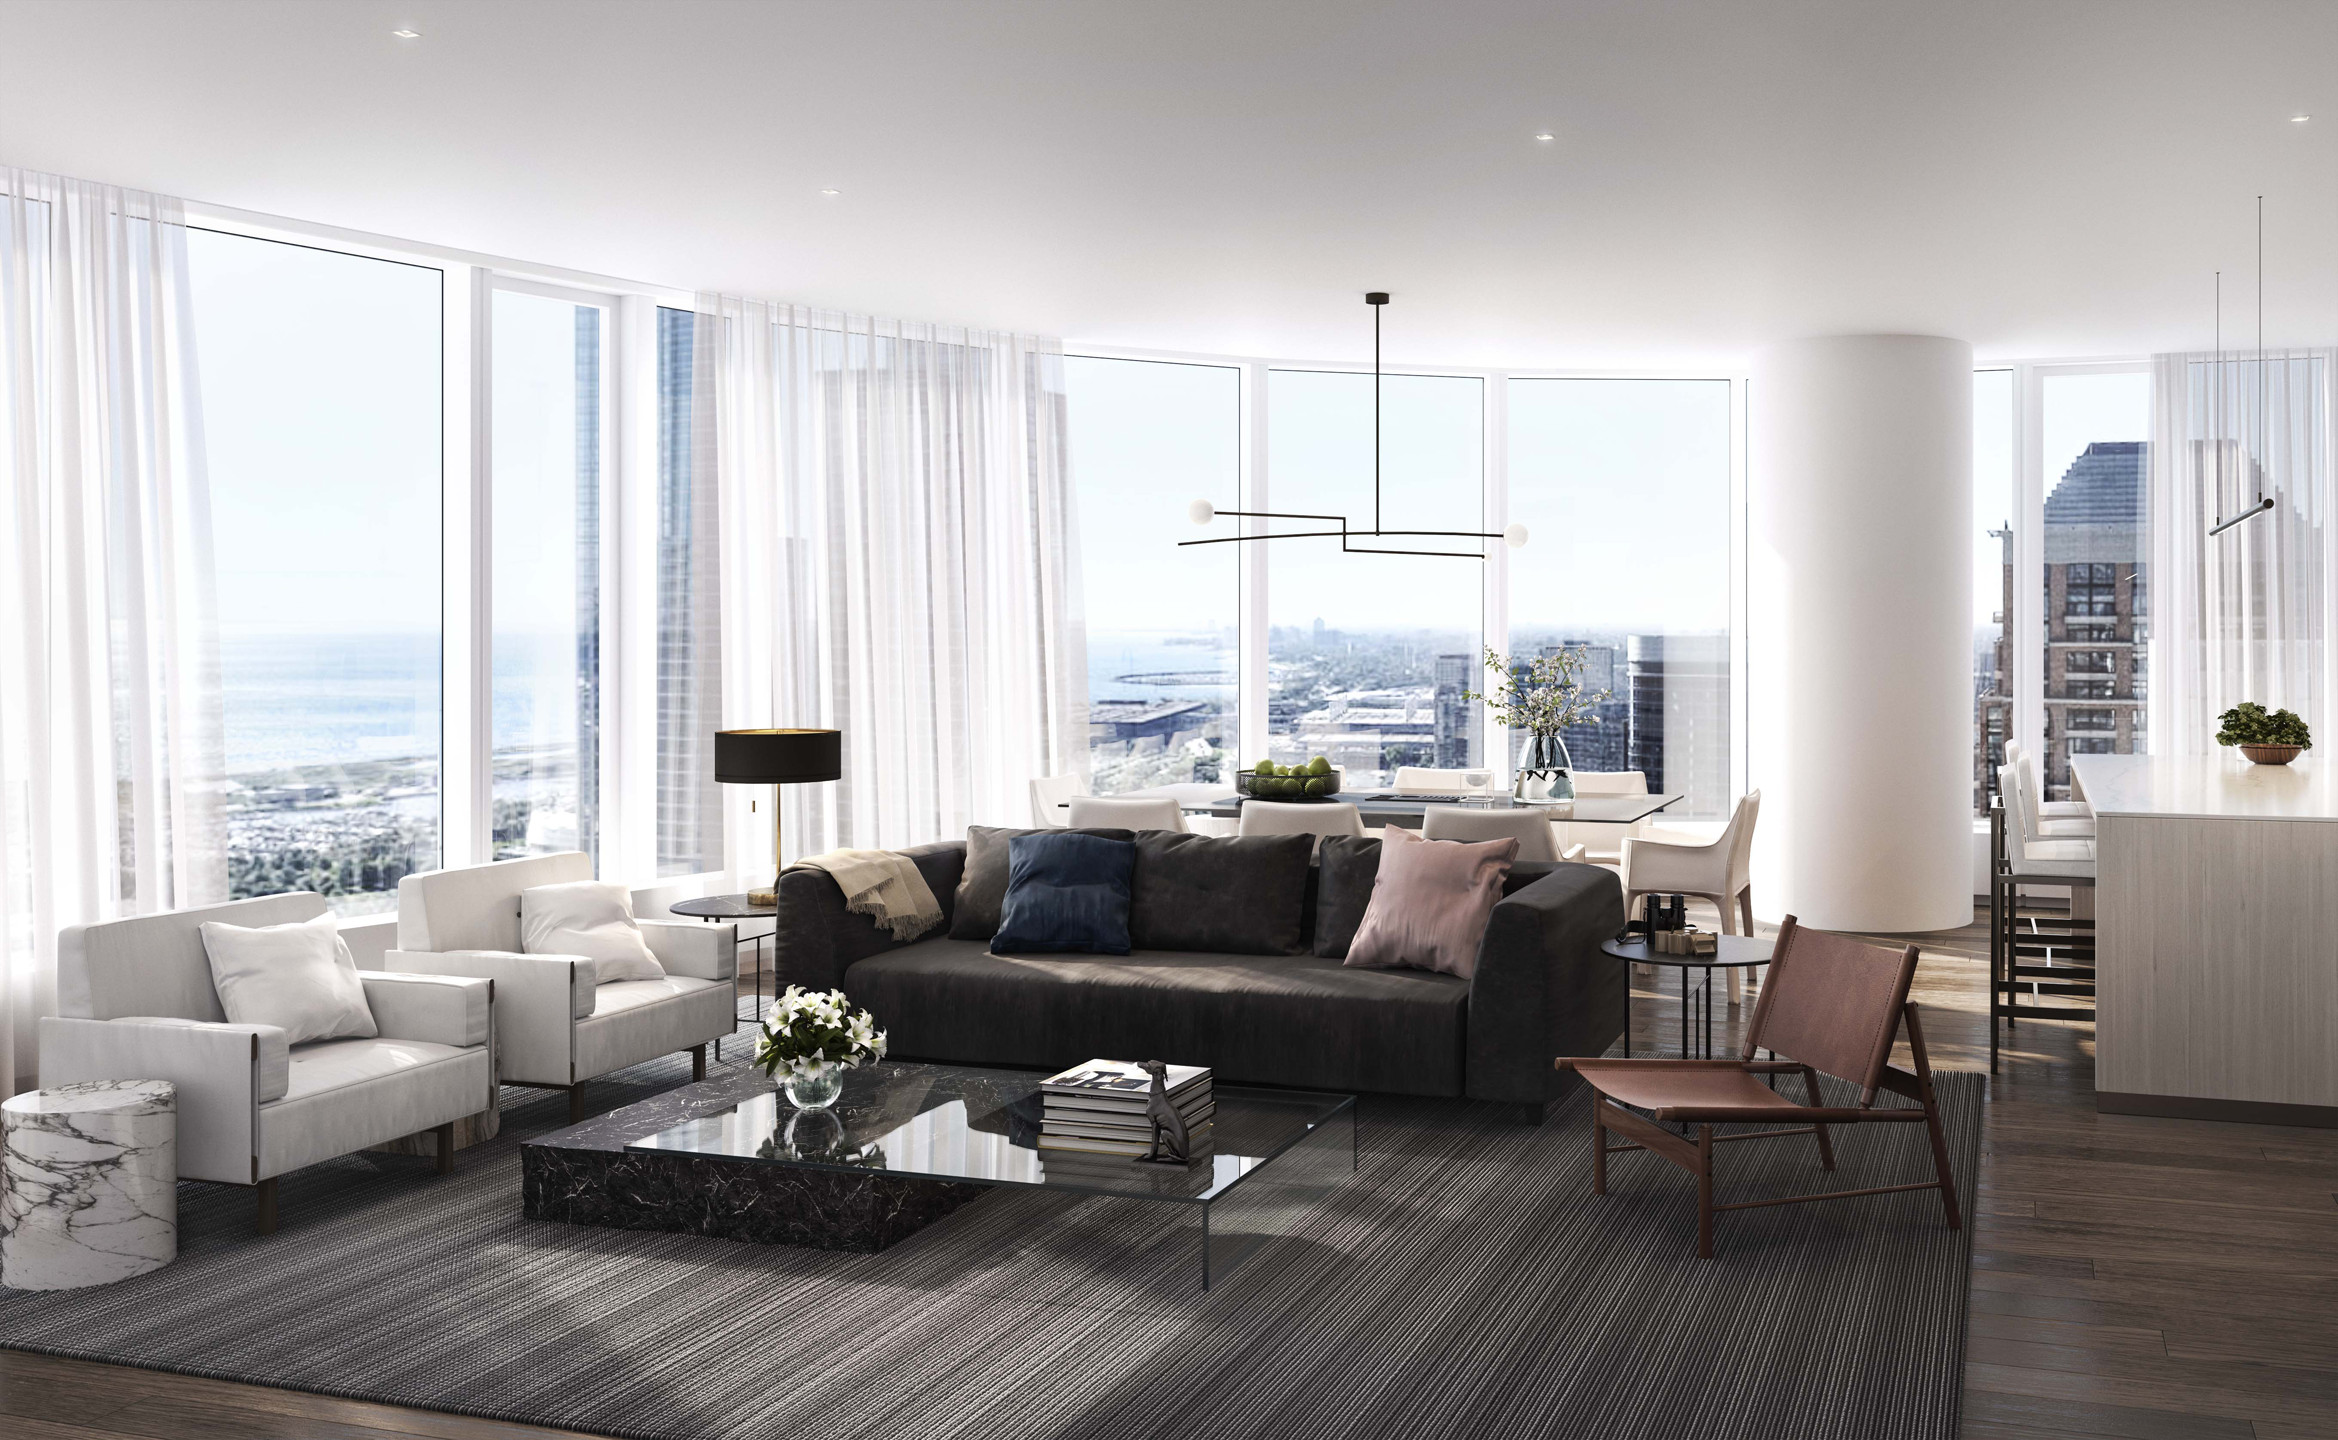 Apartment Living Room Ideas
 Sales Begin for Ultra Luxury Condo Tower on Chicago’s